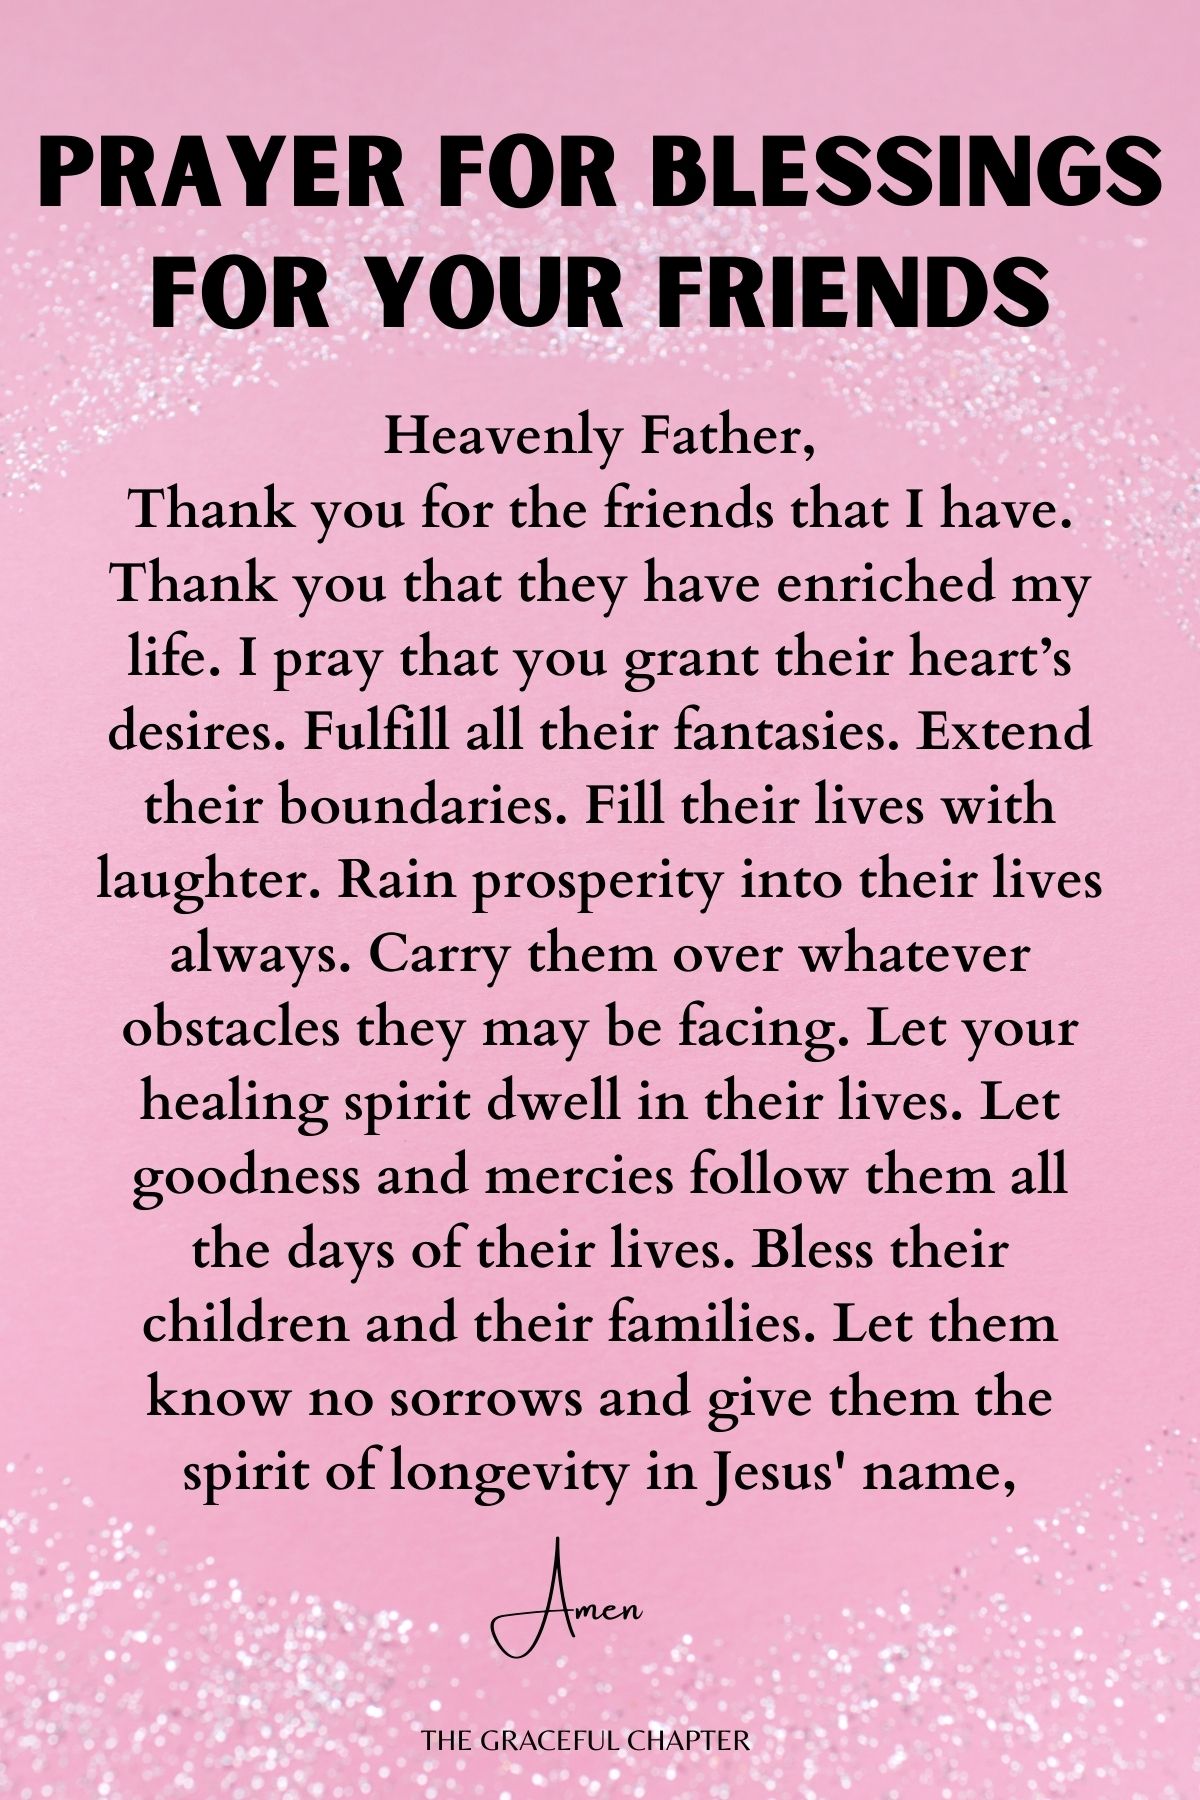 Prayer for blessings for your friends